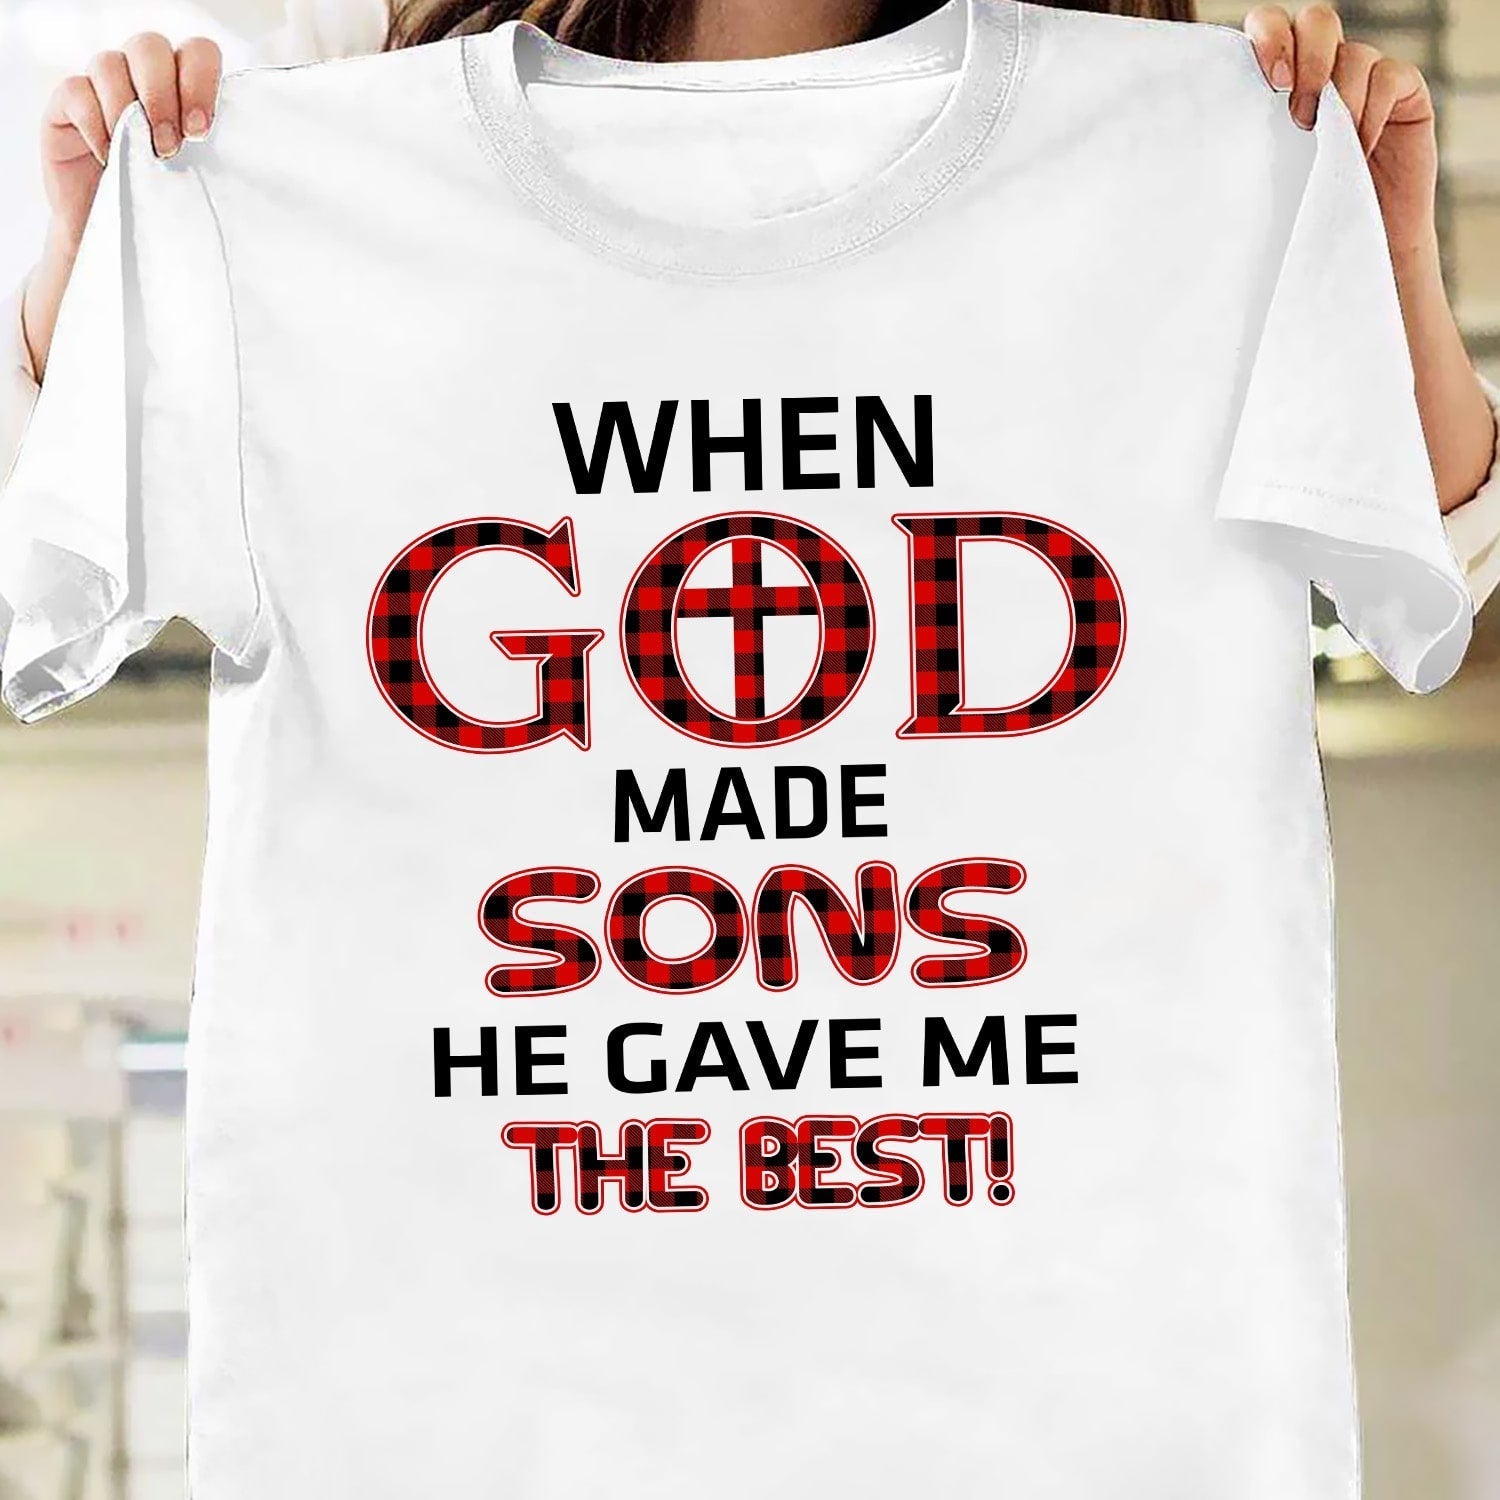 When god made sons he gave me the best – Jesus T Shirt